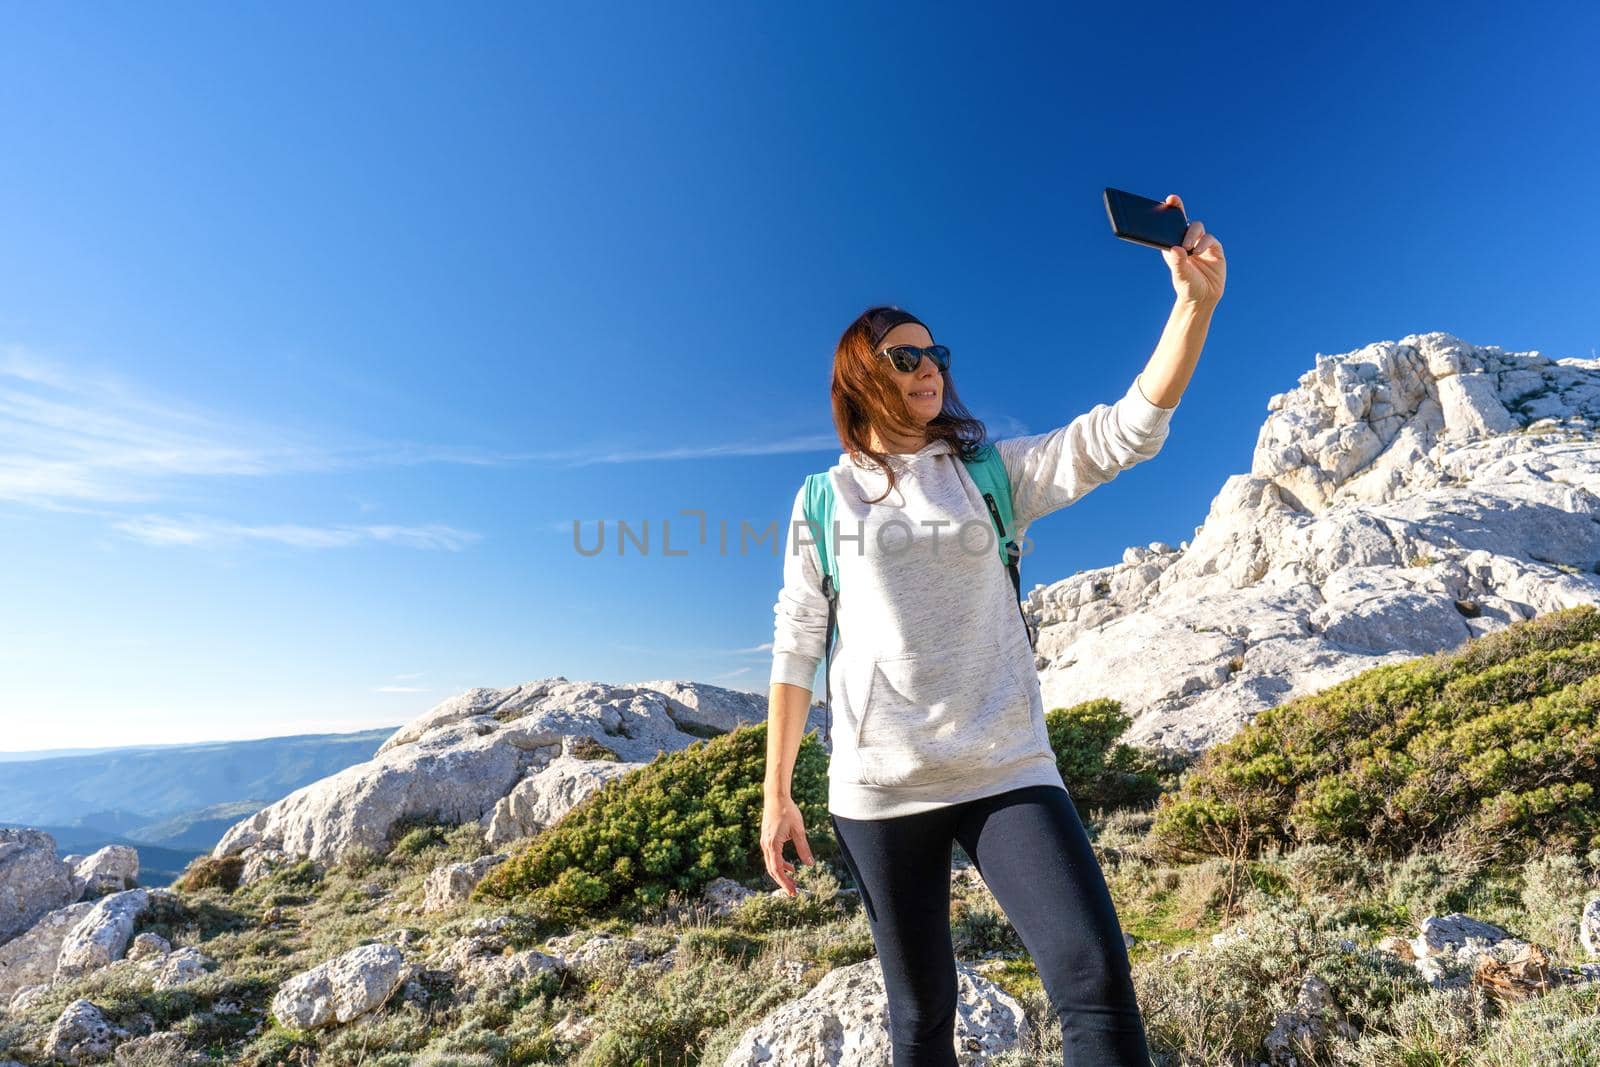 Female Caucasian hiker reaching the mountain peak take a self portrait with smartphone. Active woman with sunglasses and backpack using cellphone to share photo of her trip in nature among rocks by robbyfontanesi